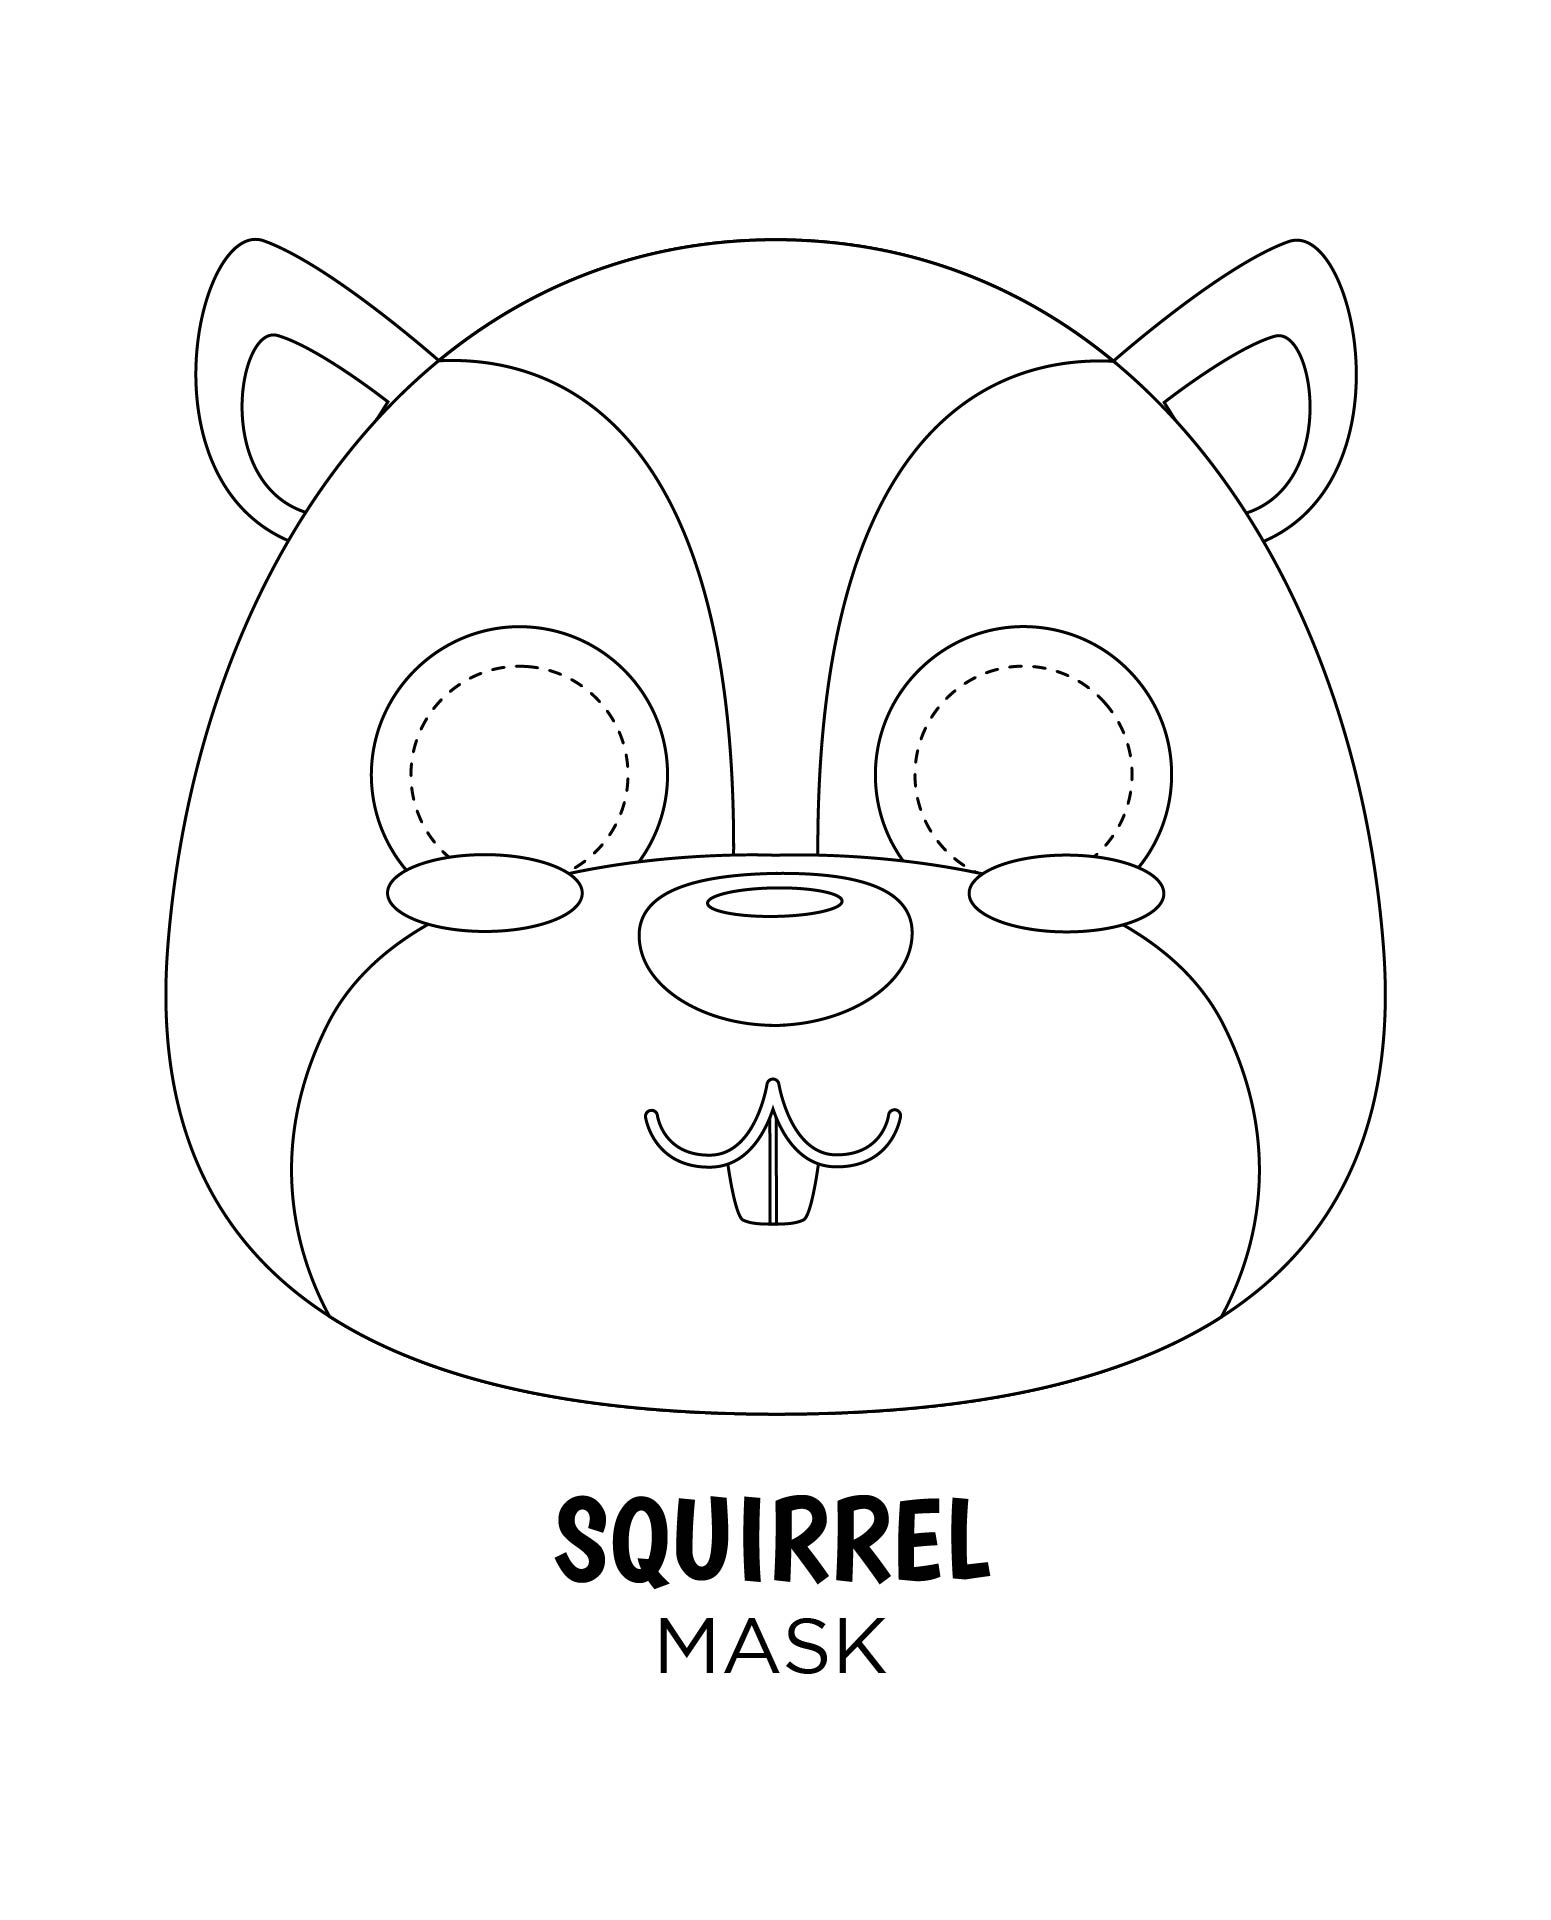 Squirrel Mask Coloring Page Printable